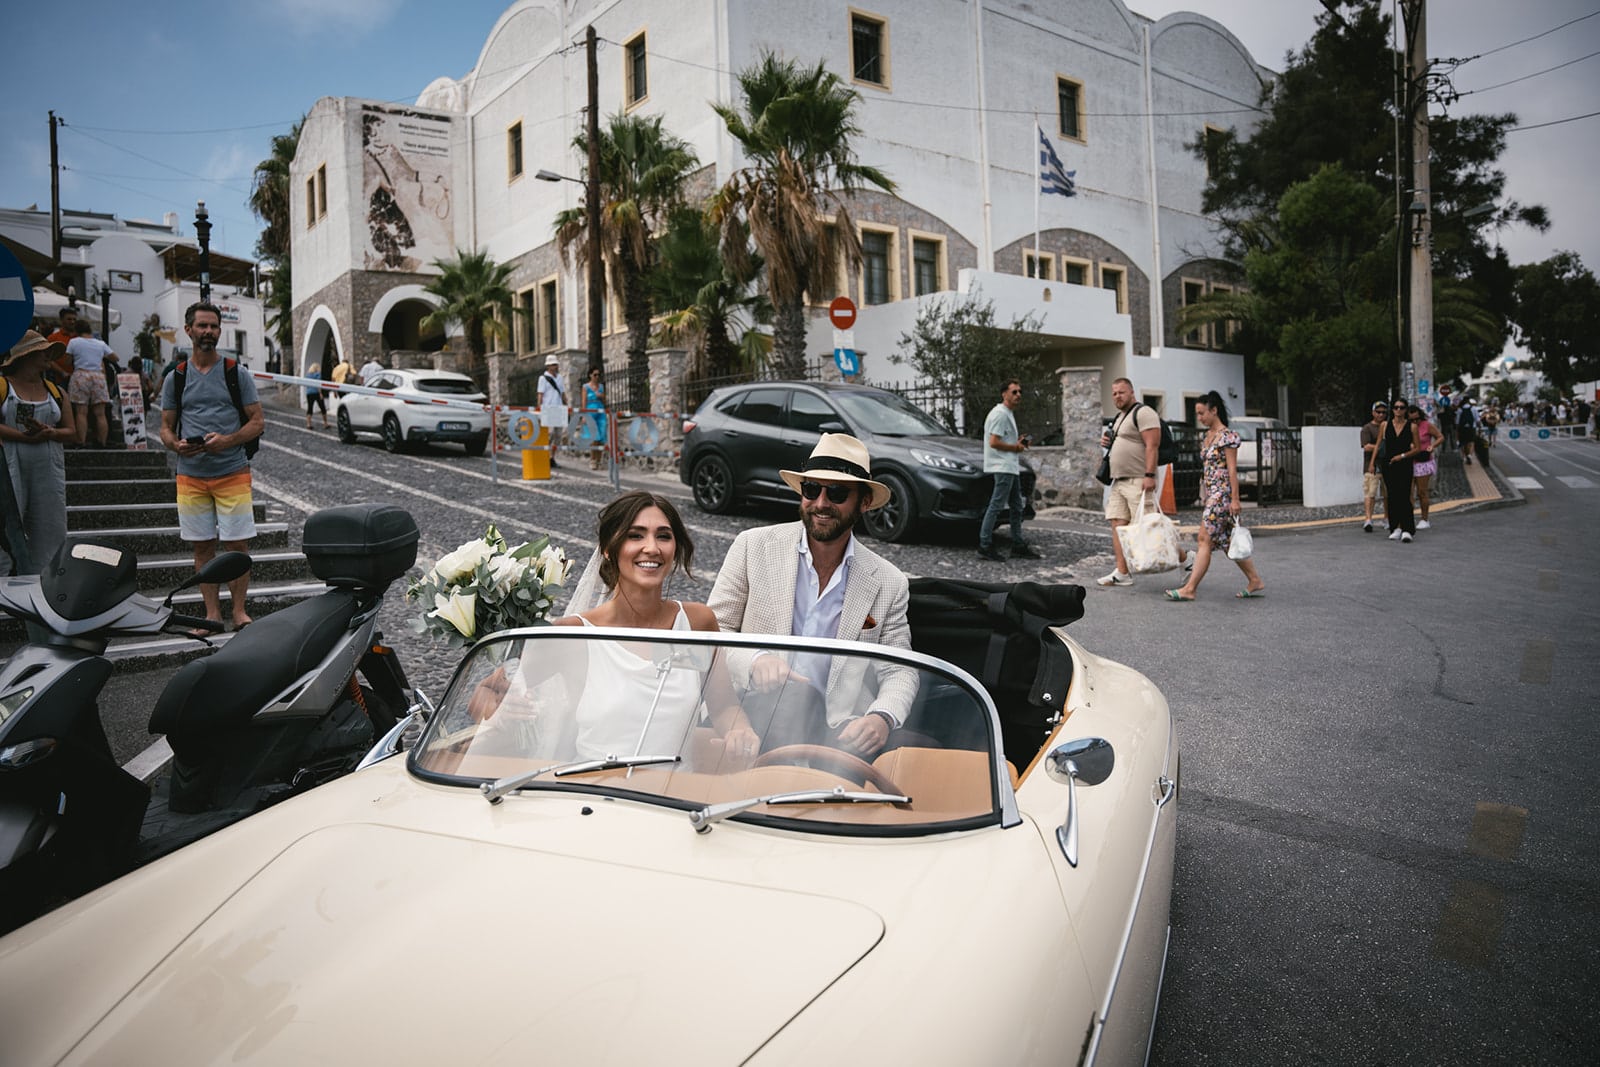 Perched above the world, their love story soars in the vintage car on Santorini’s peaks